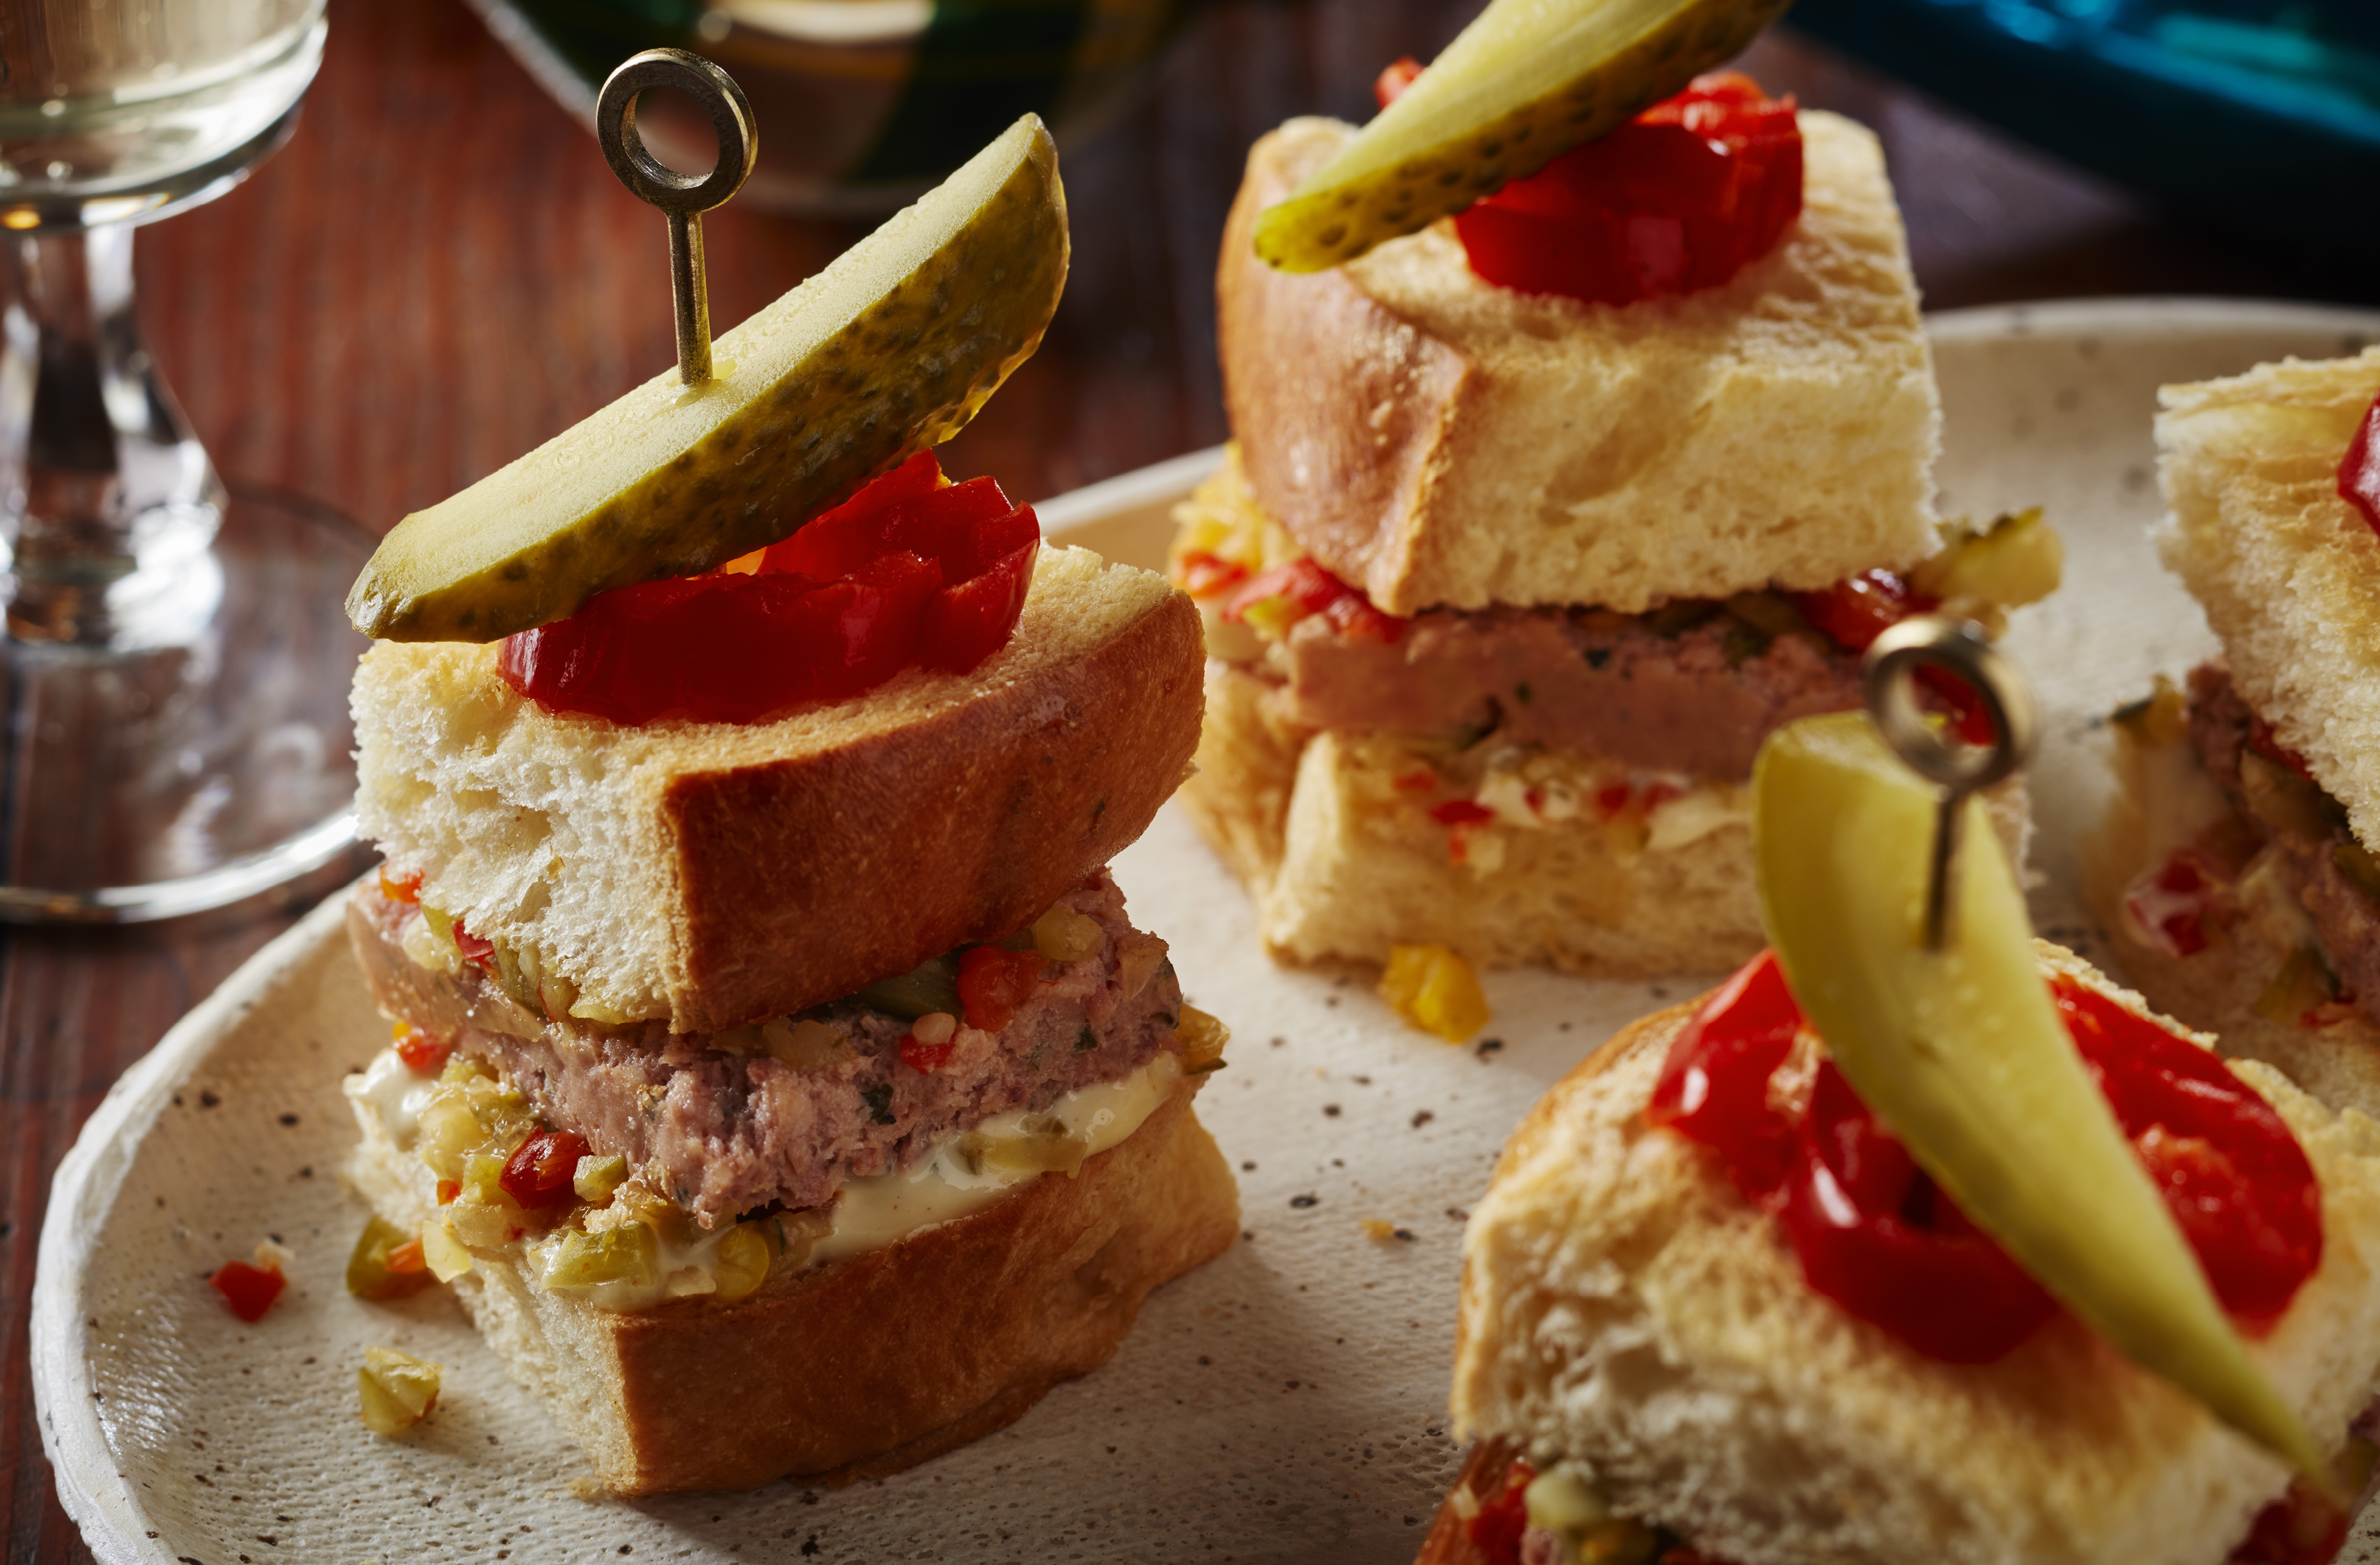 Pickles and hot peppers top mini sandwiches of pâté and relish on a platter
